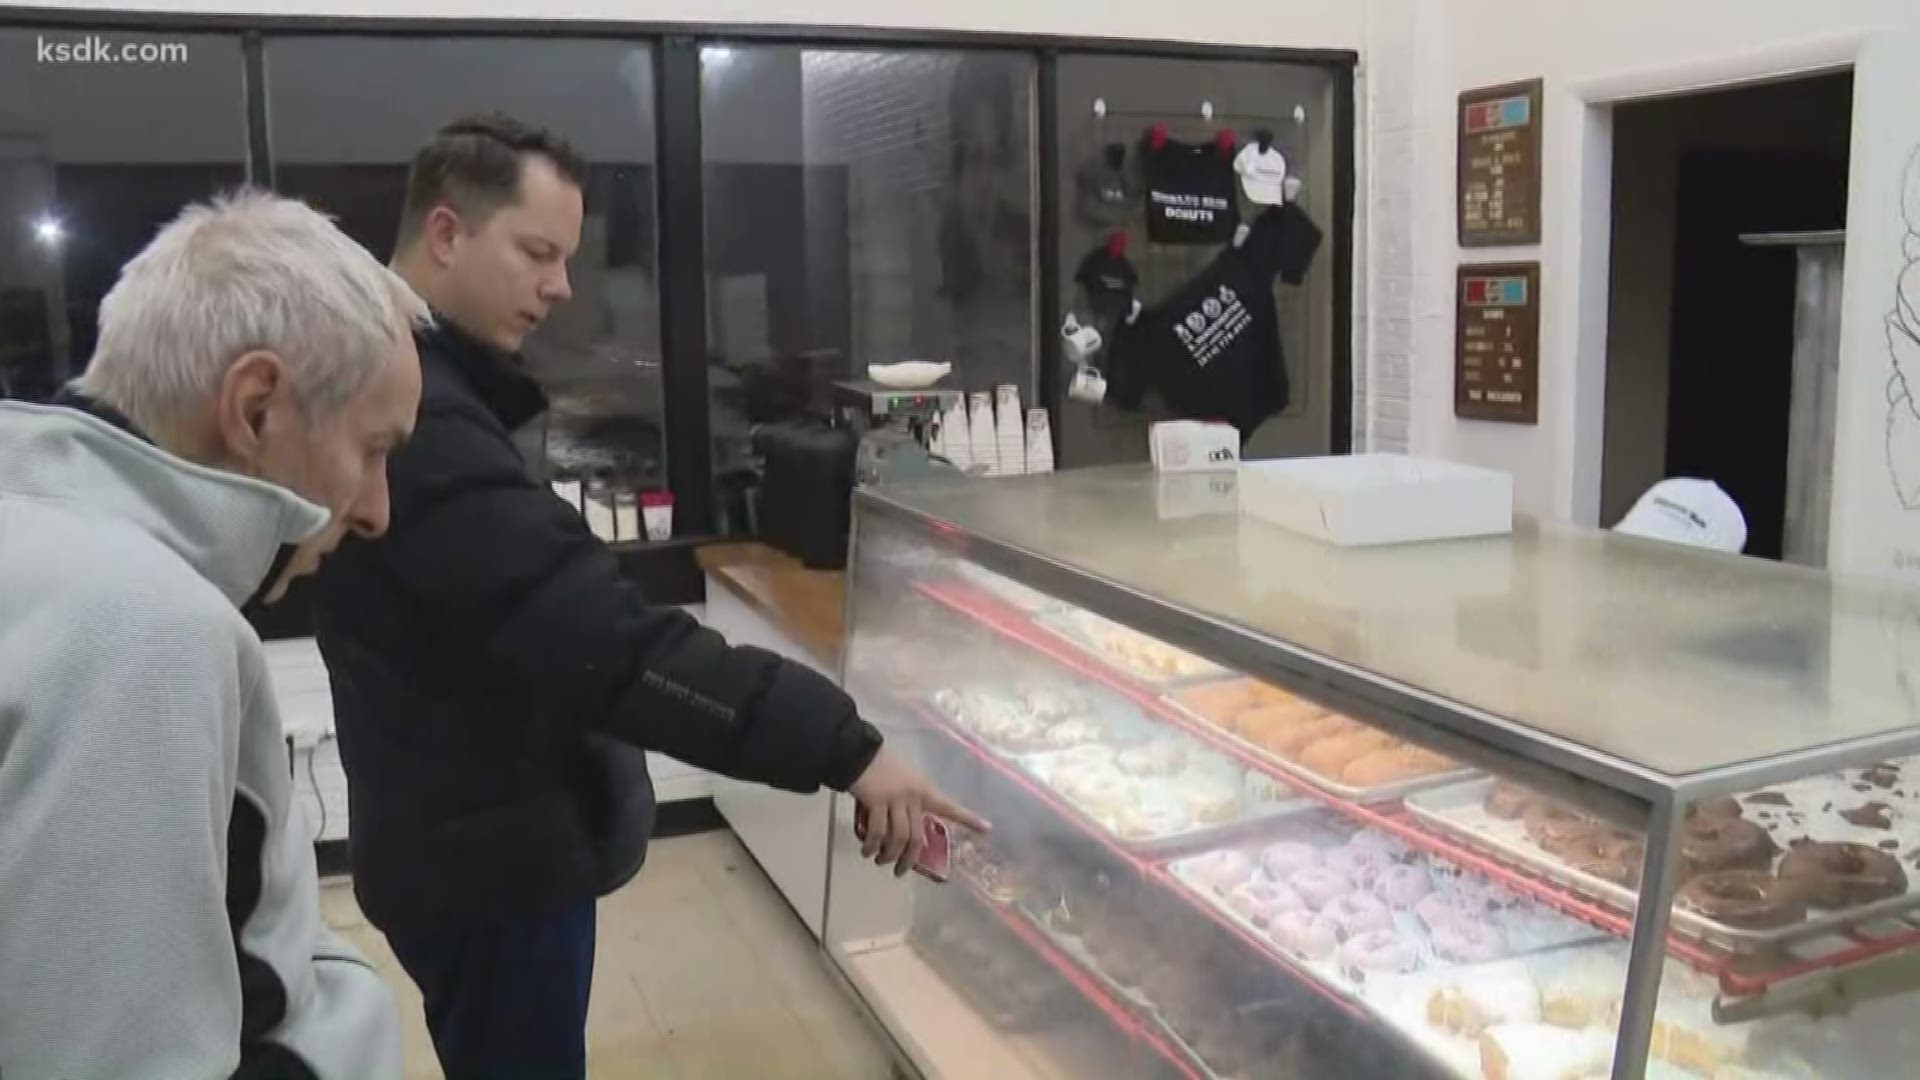 Jason Bockman, who is also the owner of Strange Donuts purchased the St. Louis staple.